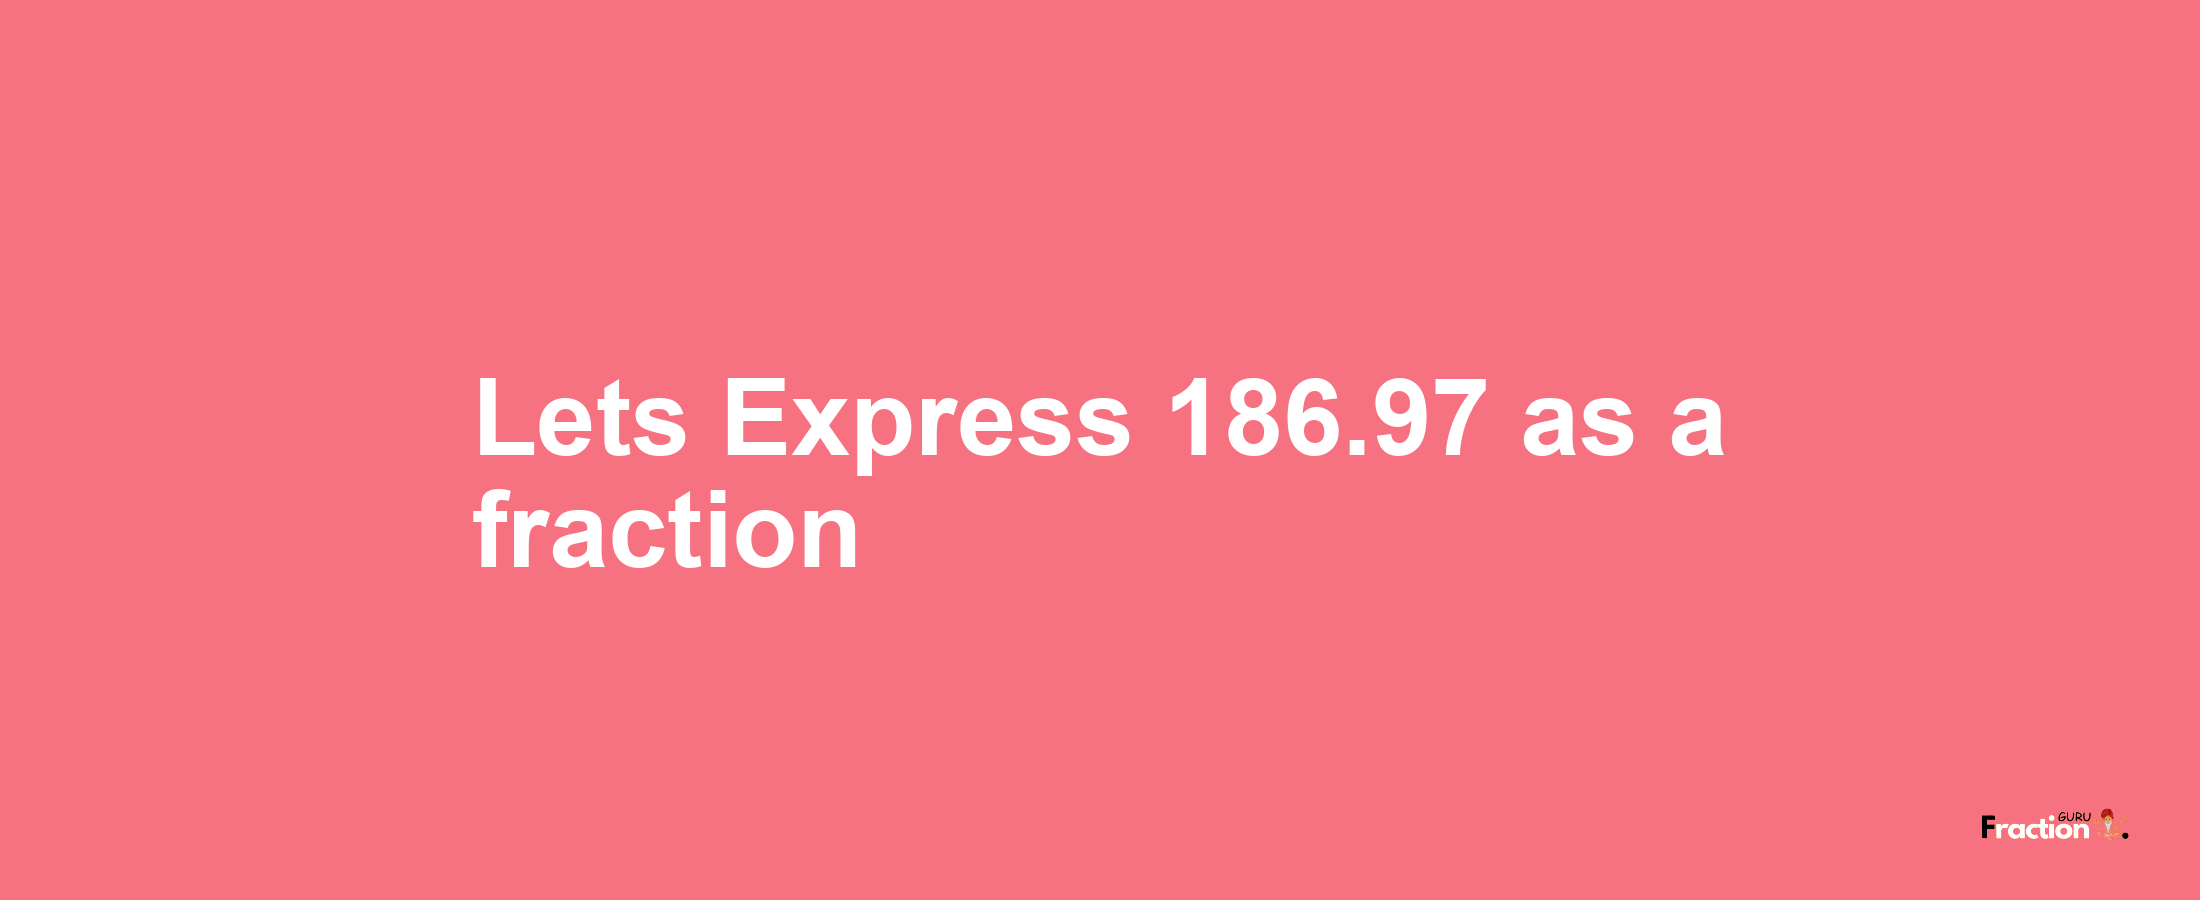 Lets Express 186.97 as afraction